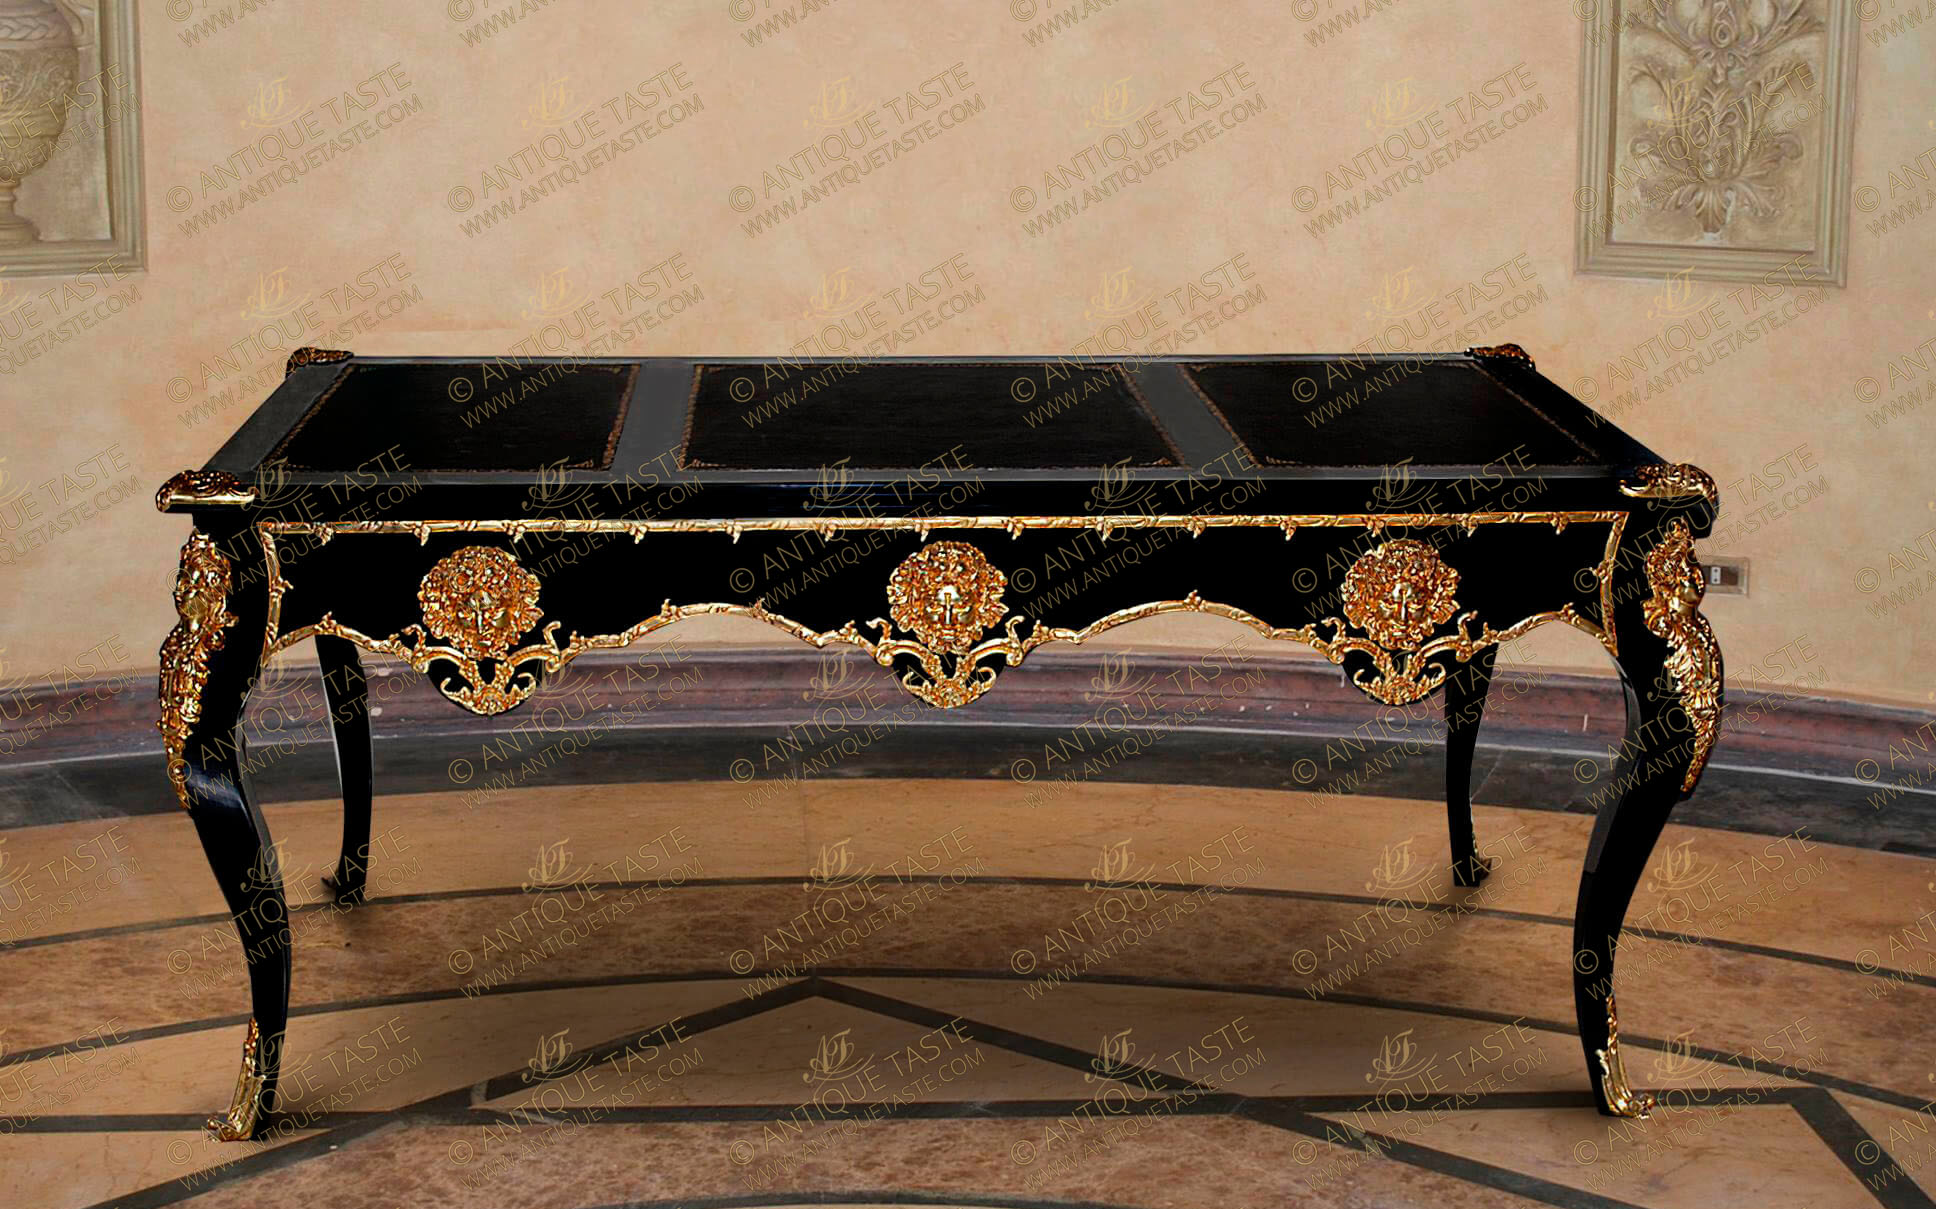 French Louis XV period style gilt-ormolu-mounted black lacquered grand Executive Writing Desk; The three sectional inset gilt-tooled leather top cornered with finely chiseled ormolu clasps. The apron below has three scalloped shaped drawers, bordered with hammered foliate ormolu filets in a satin and burnish finish and each drawer is ornamented with a detailed fine cast gilt-ormolu Satyr Mask, The central drawer with ormolu keyhole escutcheon; The desk is raised on four cabriole legs each is topped with gilt-ormolu female bust on foliate chutes body and terminated with ormolu acanthus volute sabots; The sides and back have the same design and mounts of the front. The desk is available in other finishing and silvered ormolu casting. The fine desk is also available in different sizes per request 160cm, 180cm and two meters width.